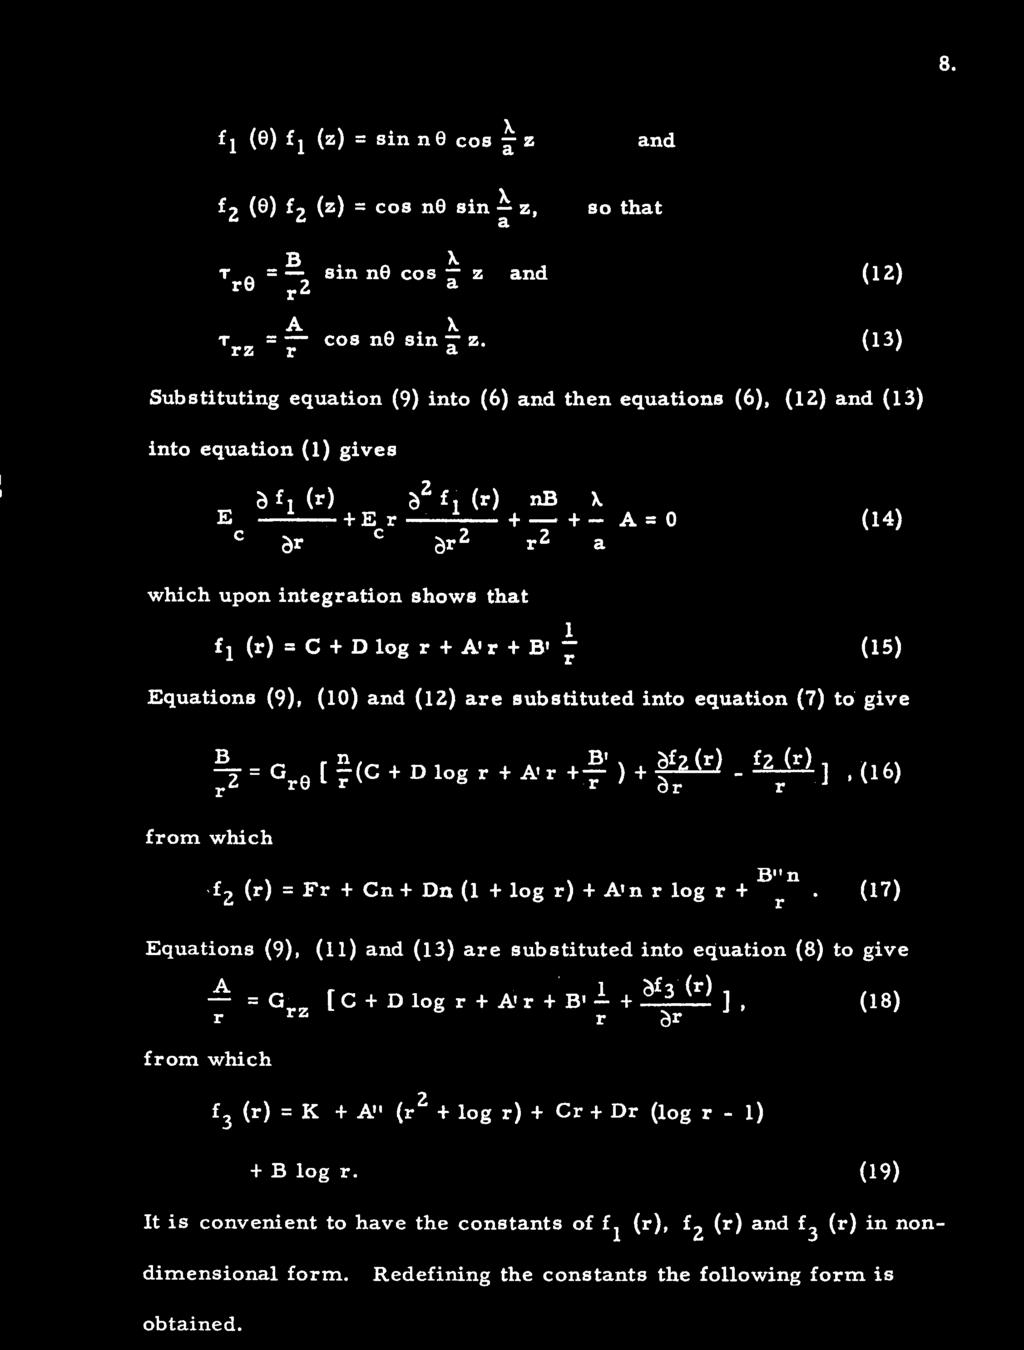 (r) = C + D log r + Al r + B 1 2, (15) Equations (9), (10) and (12) are substituted into equation (7) to give B f2 (r) f2 ;2- = Gre [ 1-11:(C + D log r + At r +7, ) + r - r(r), (16) from which,f 2